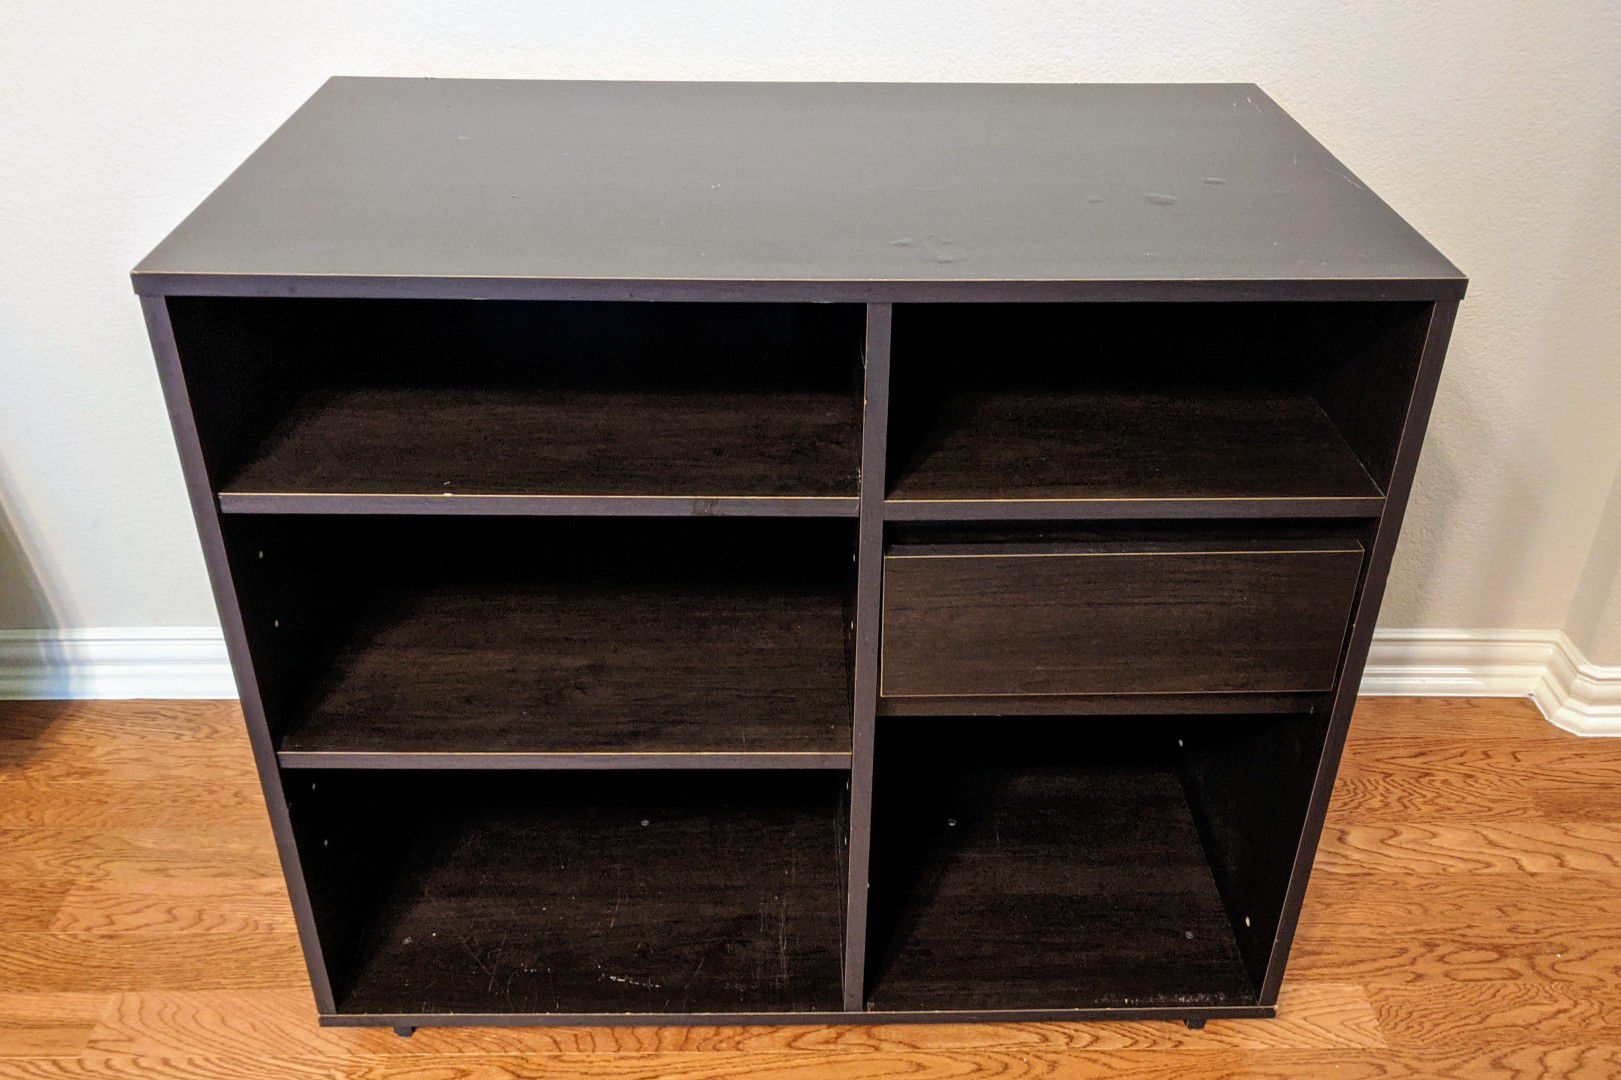 Espresso Brown Laminate Cabinet Shelf Stand with Pull-out Drawer